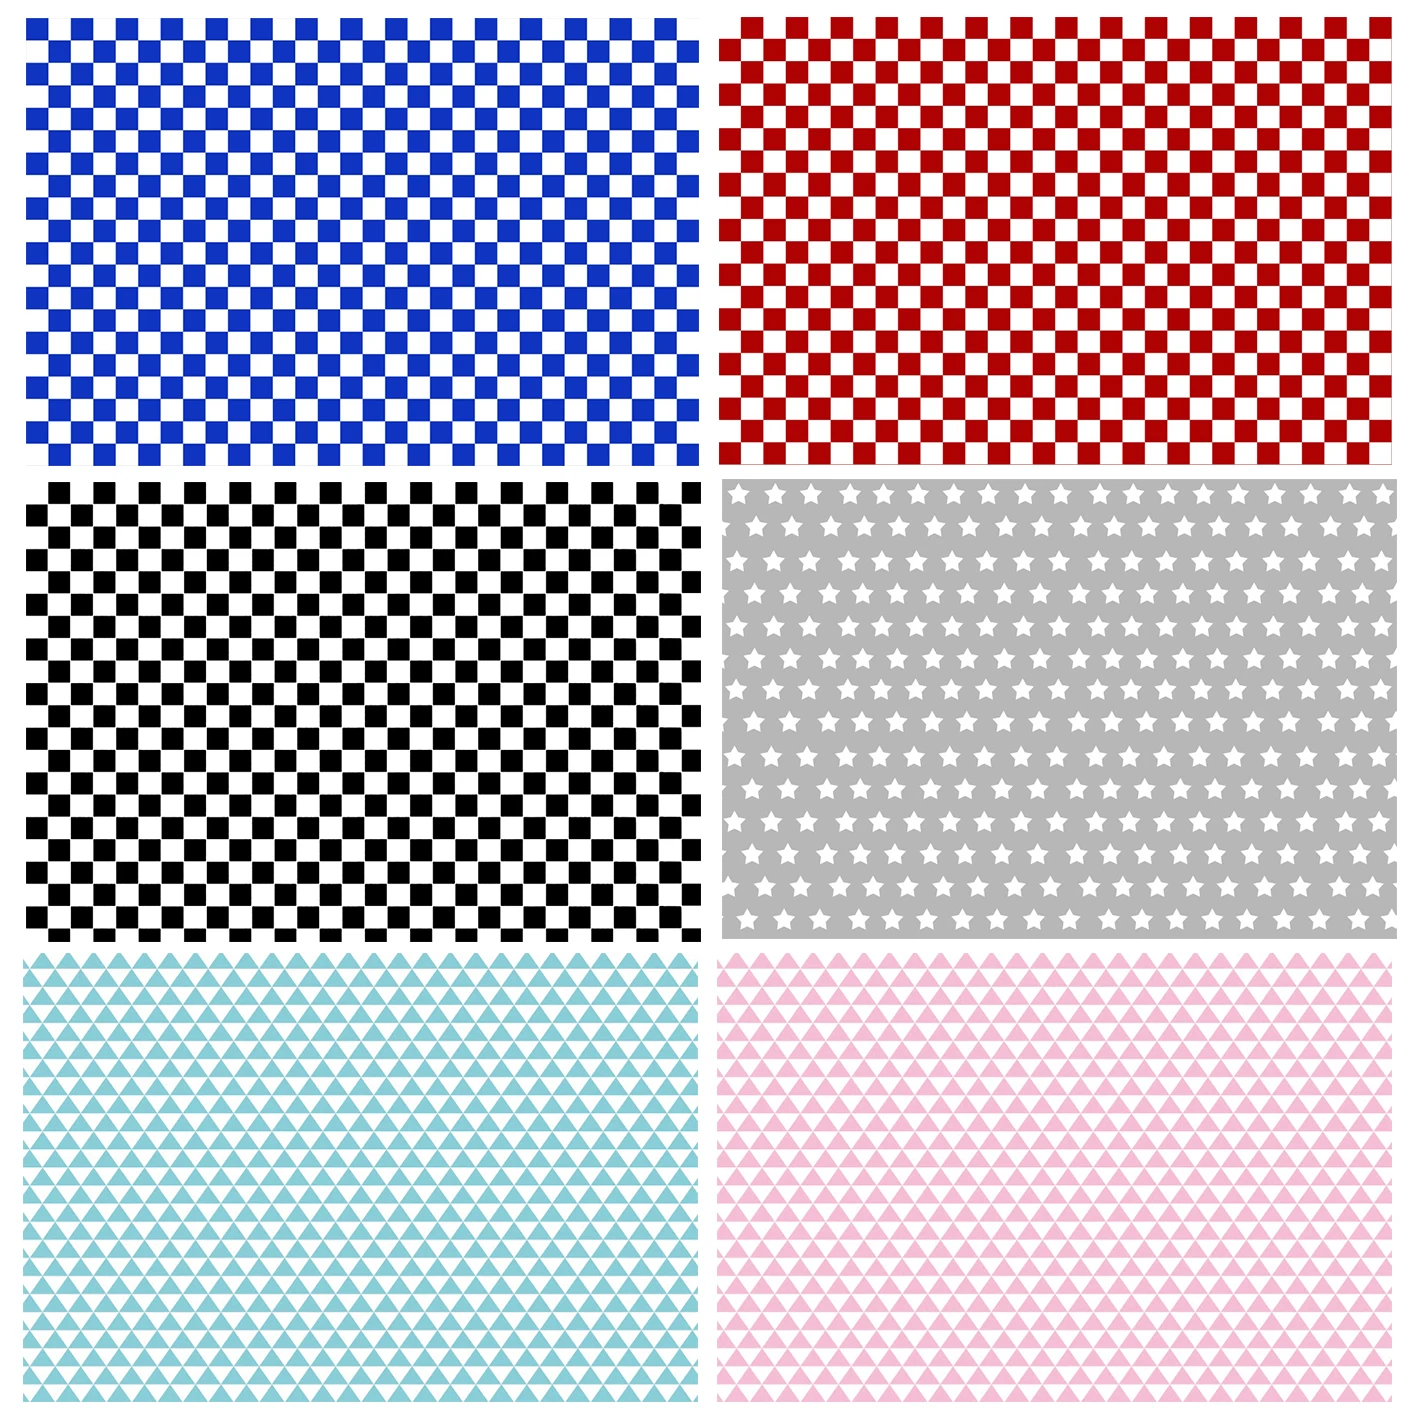 Pink & White Chequerboard Square Pattern Wallpaper